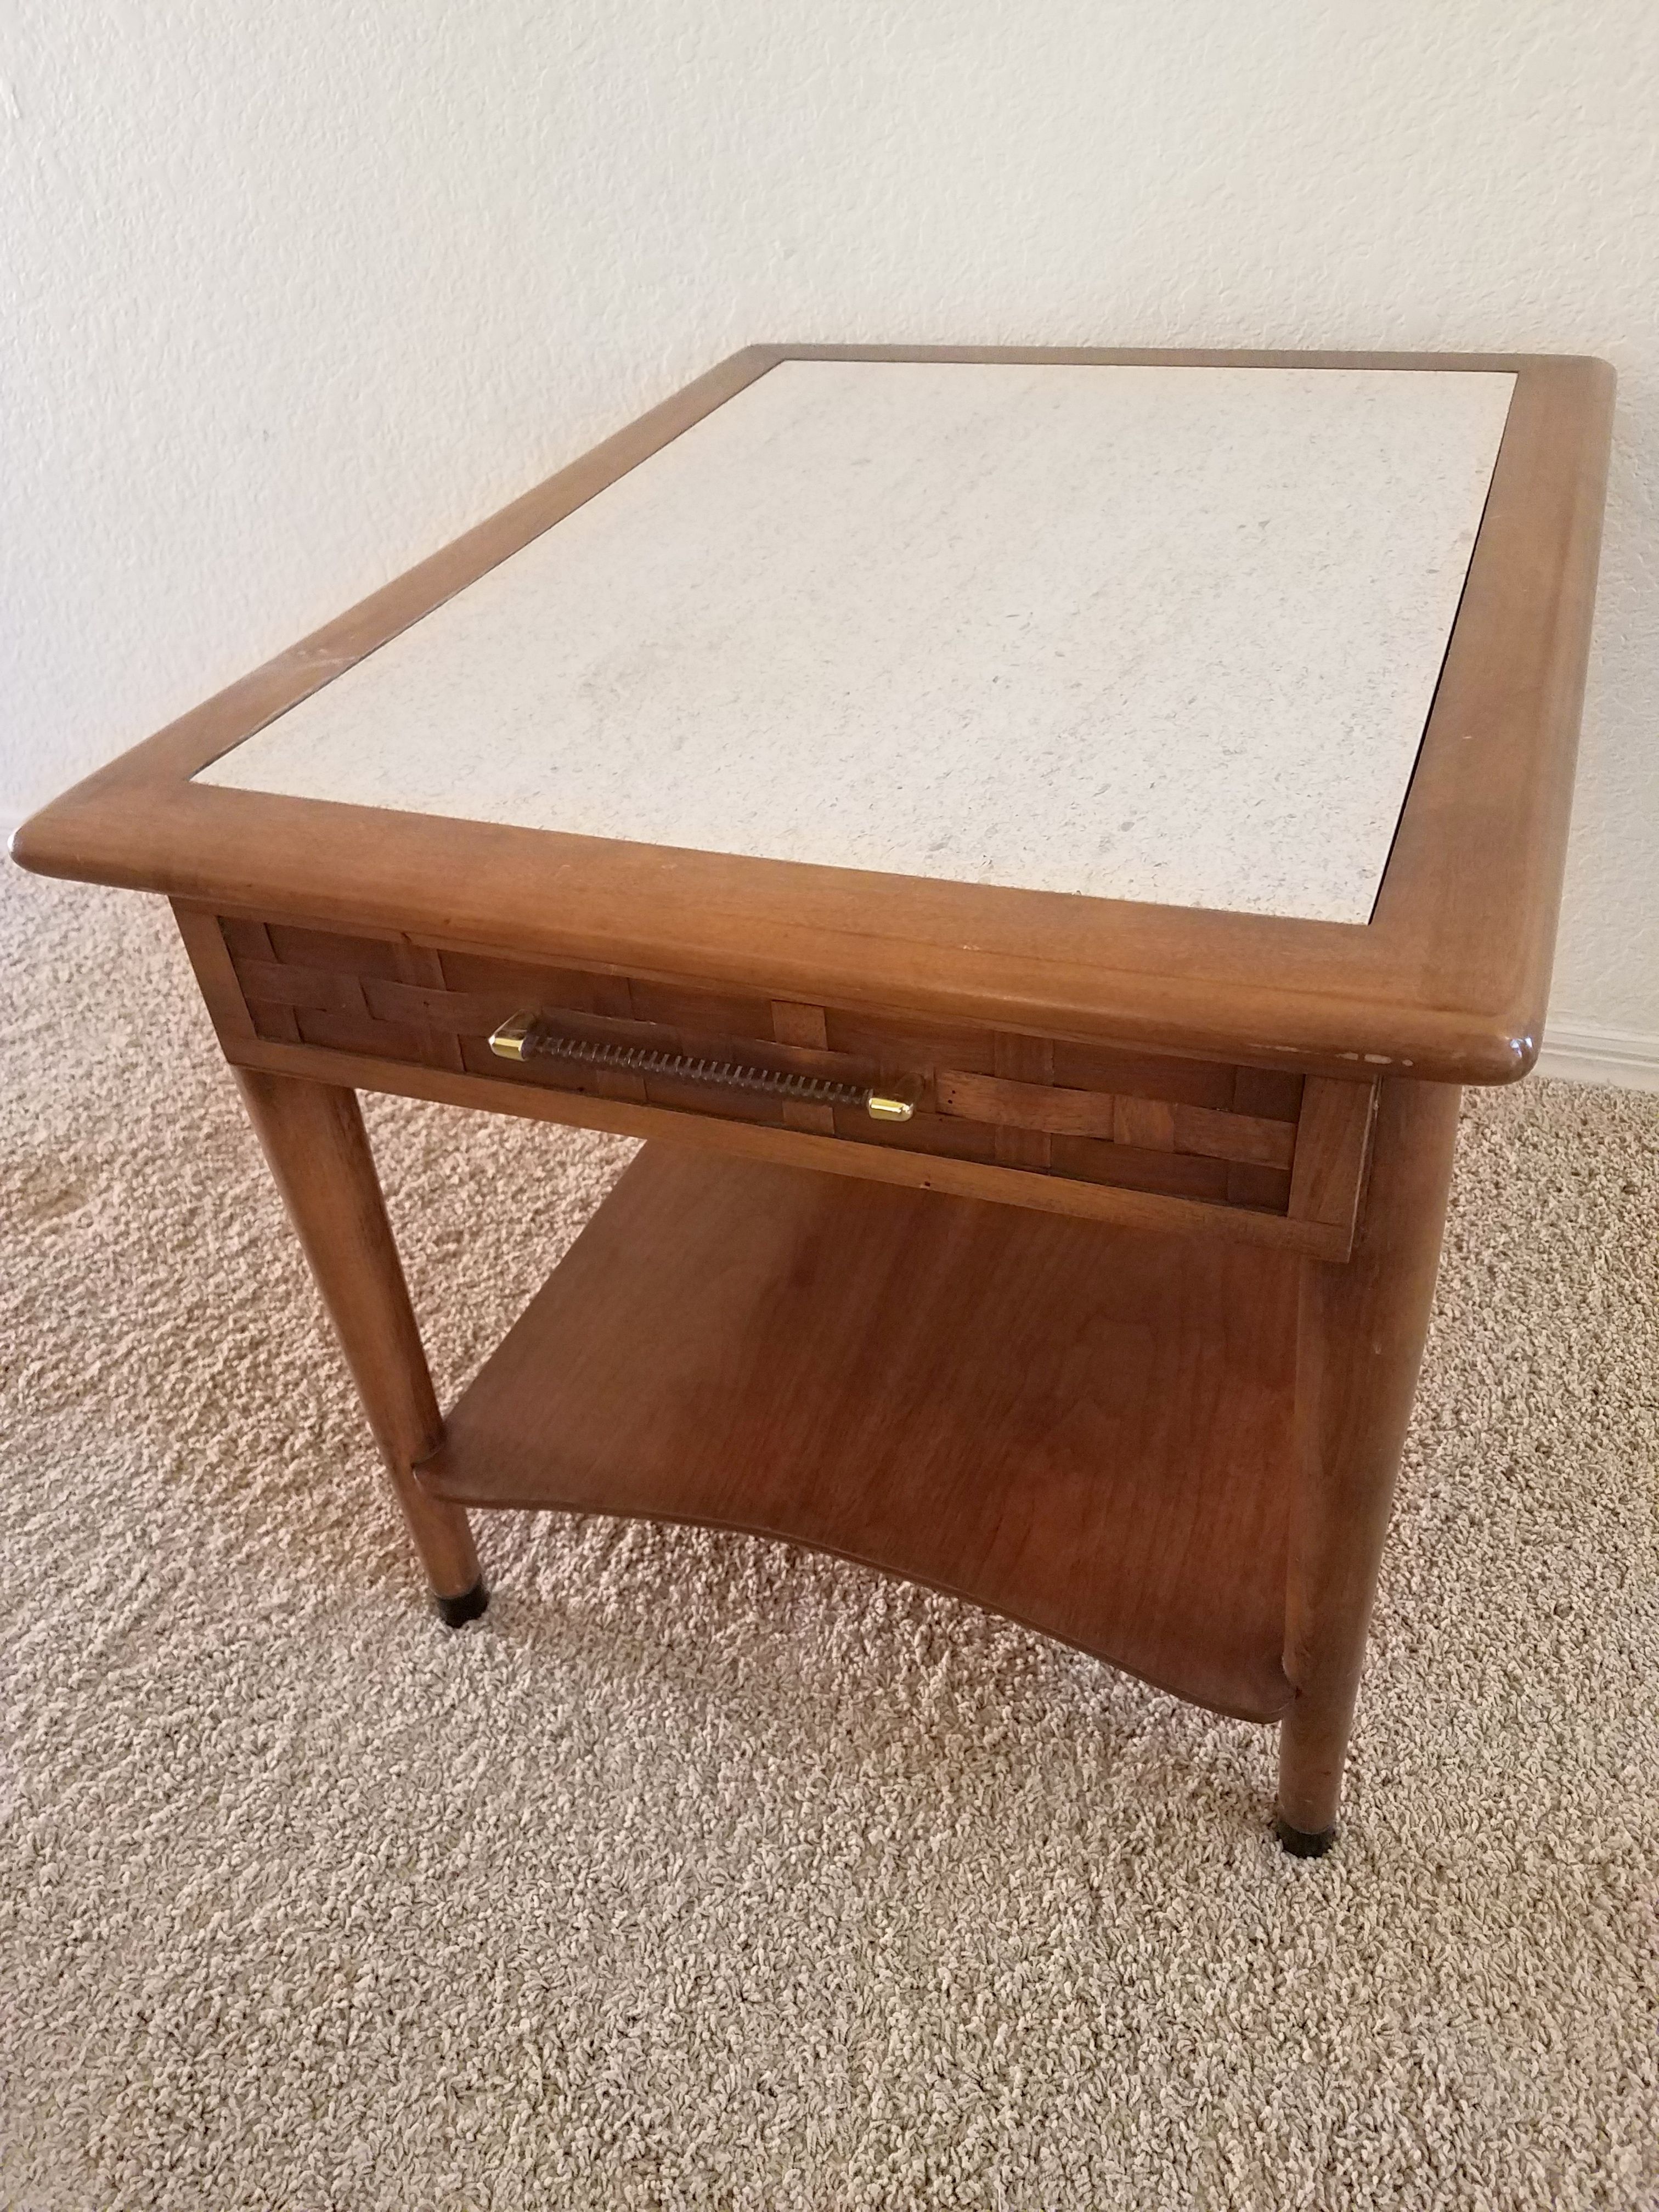 mid century end table with marble top and basket weave drawer detail reminiscent lane furniture pereception series usb ethan allen style brown couch pillow ideas white copper side